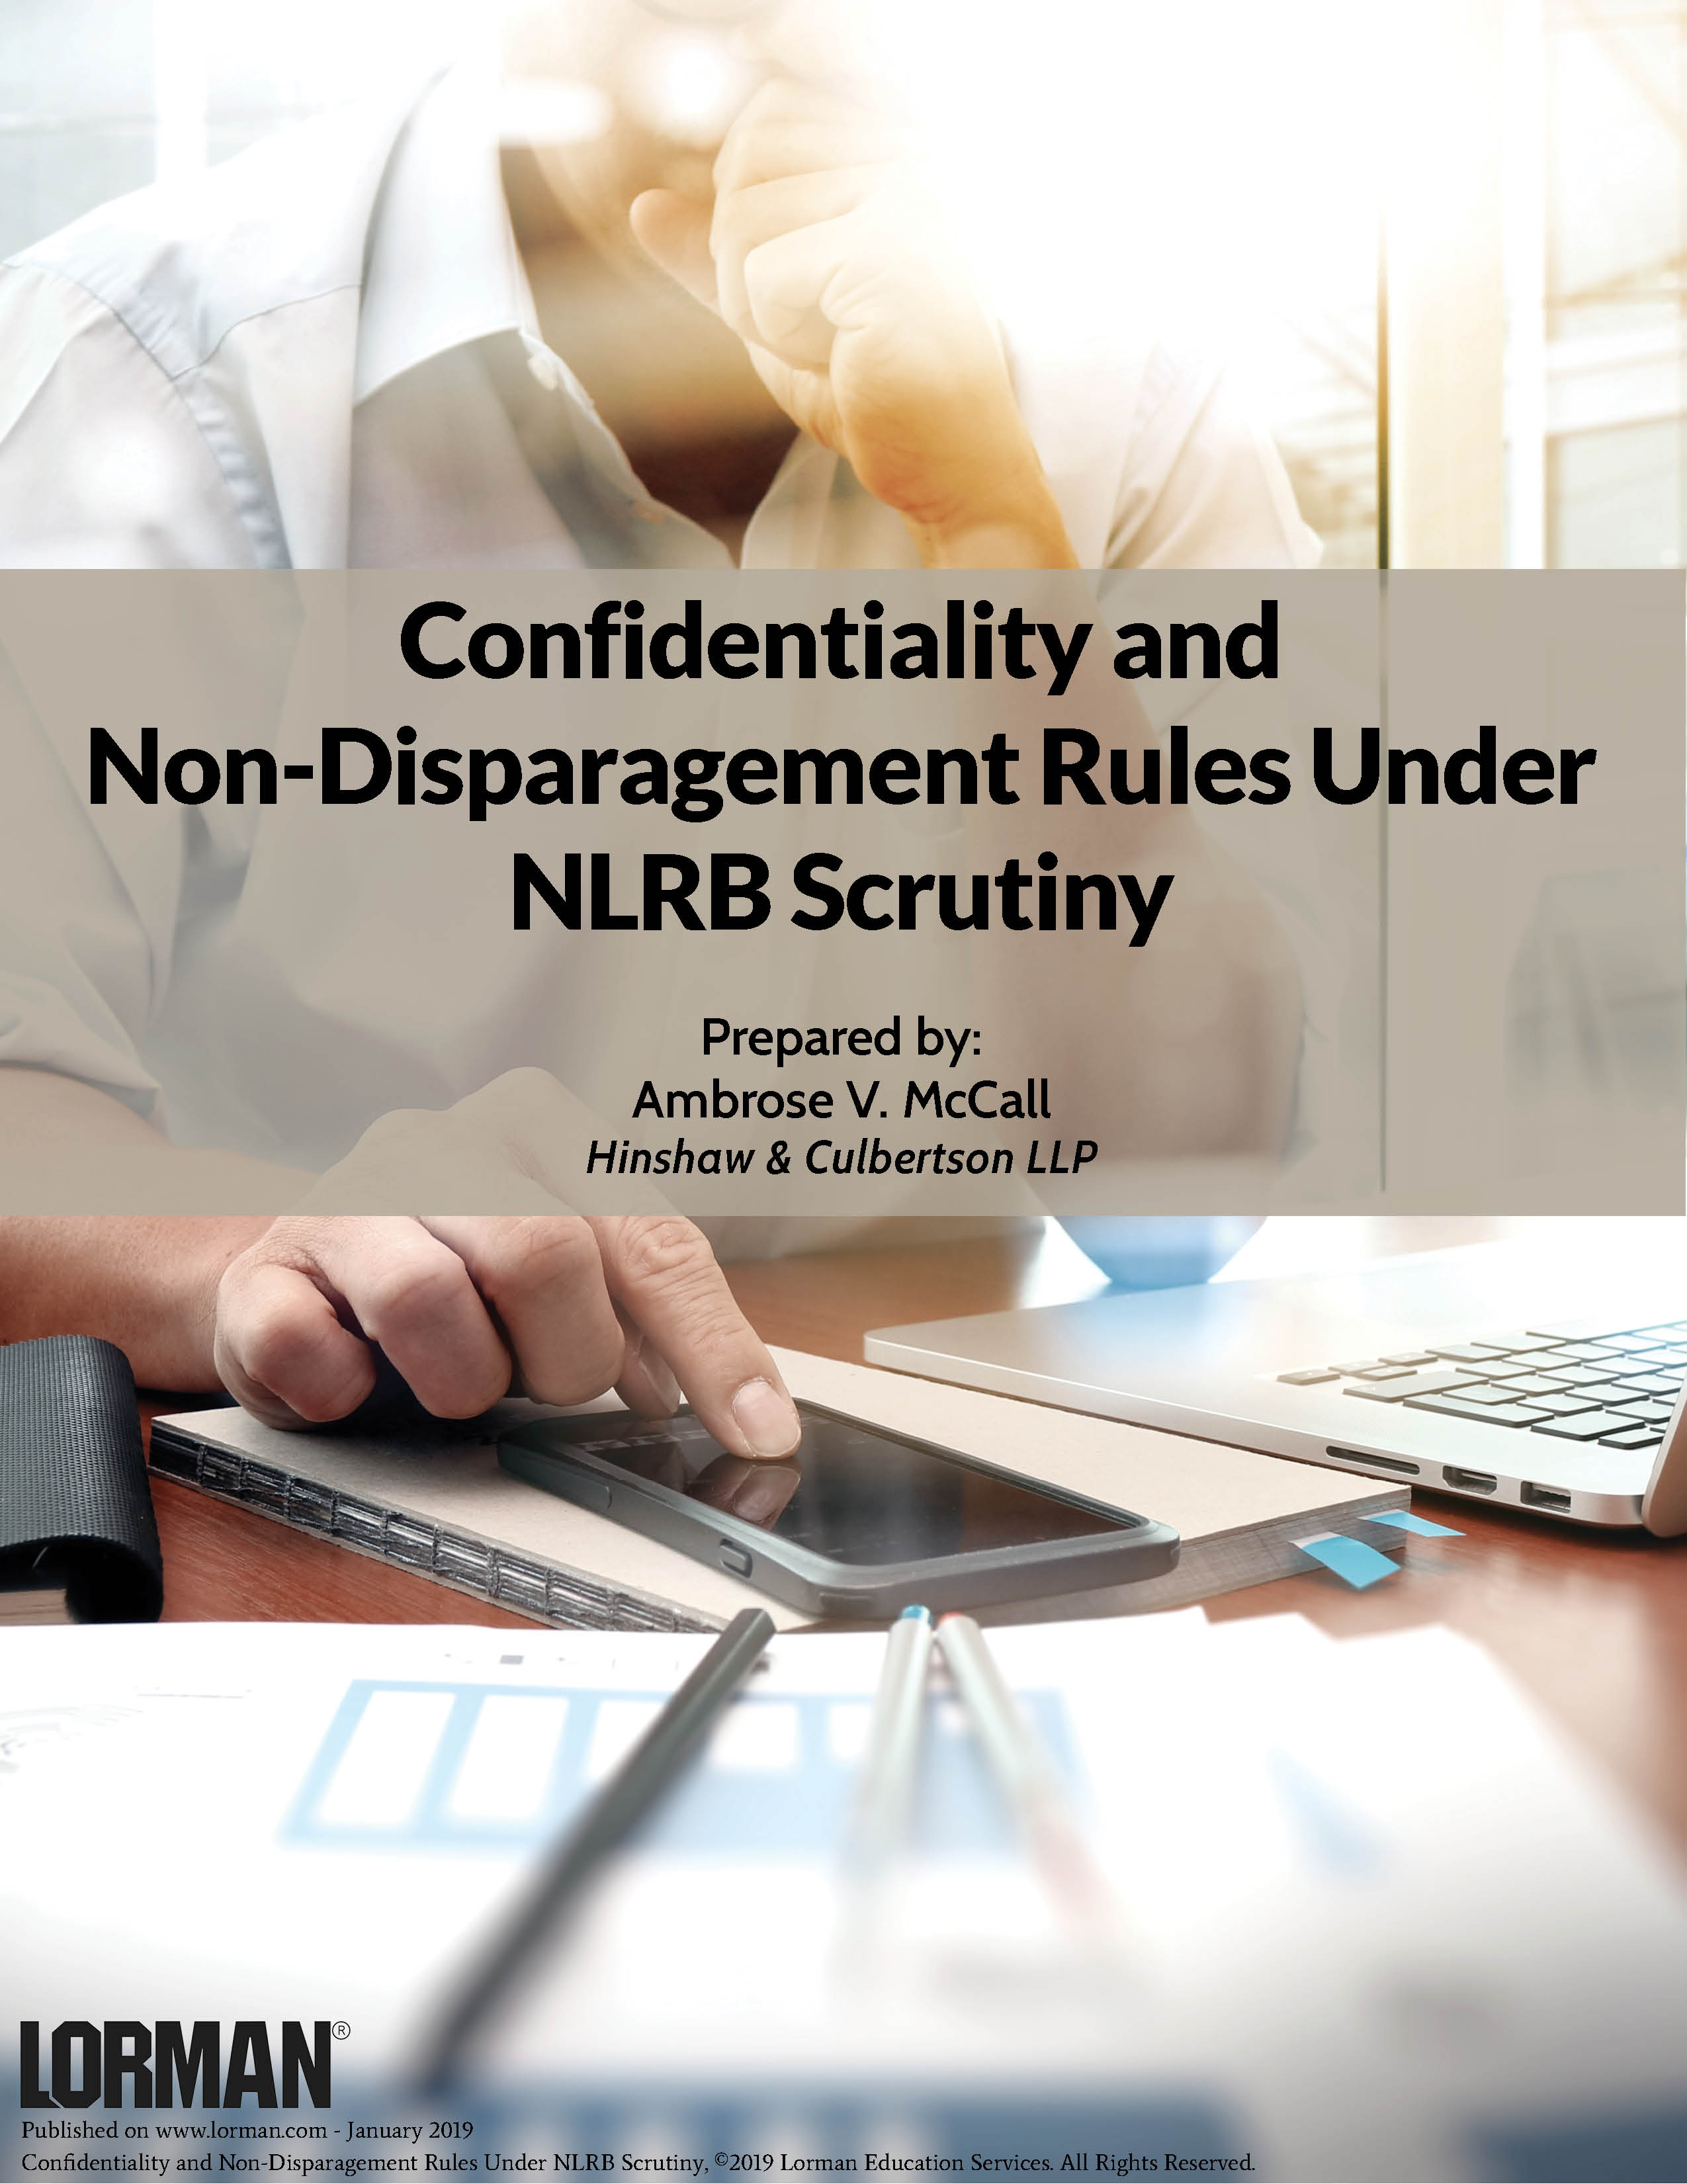 Confidentiality and Non-Disparagement Rules Under NLRB Scrutiny